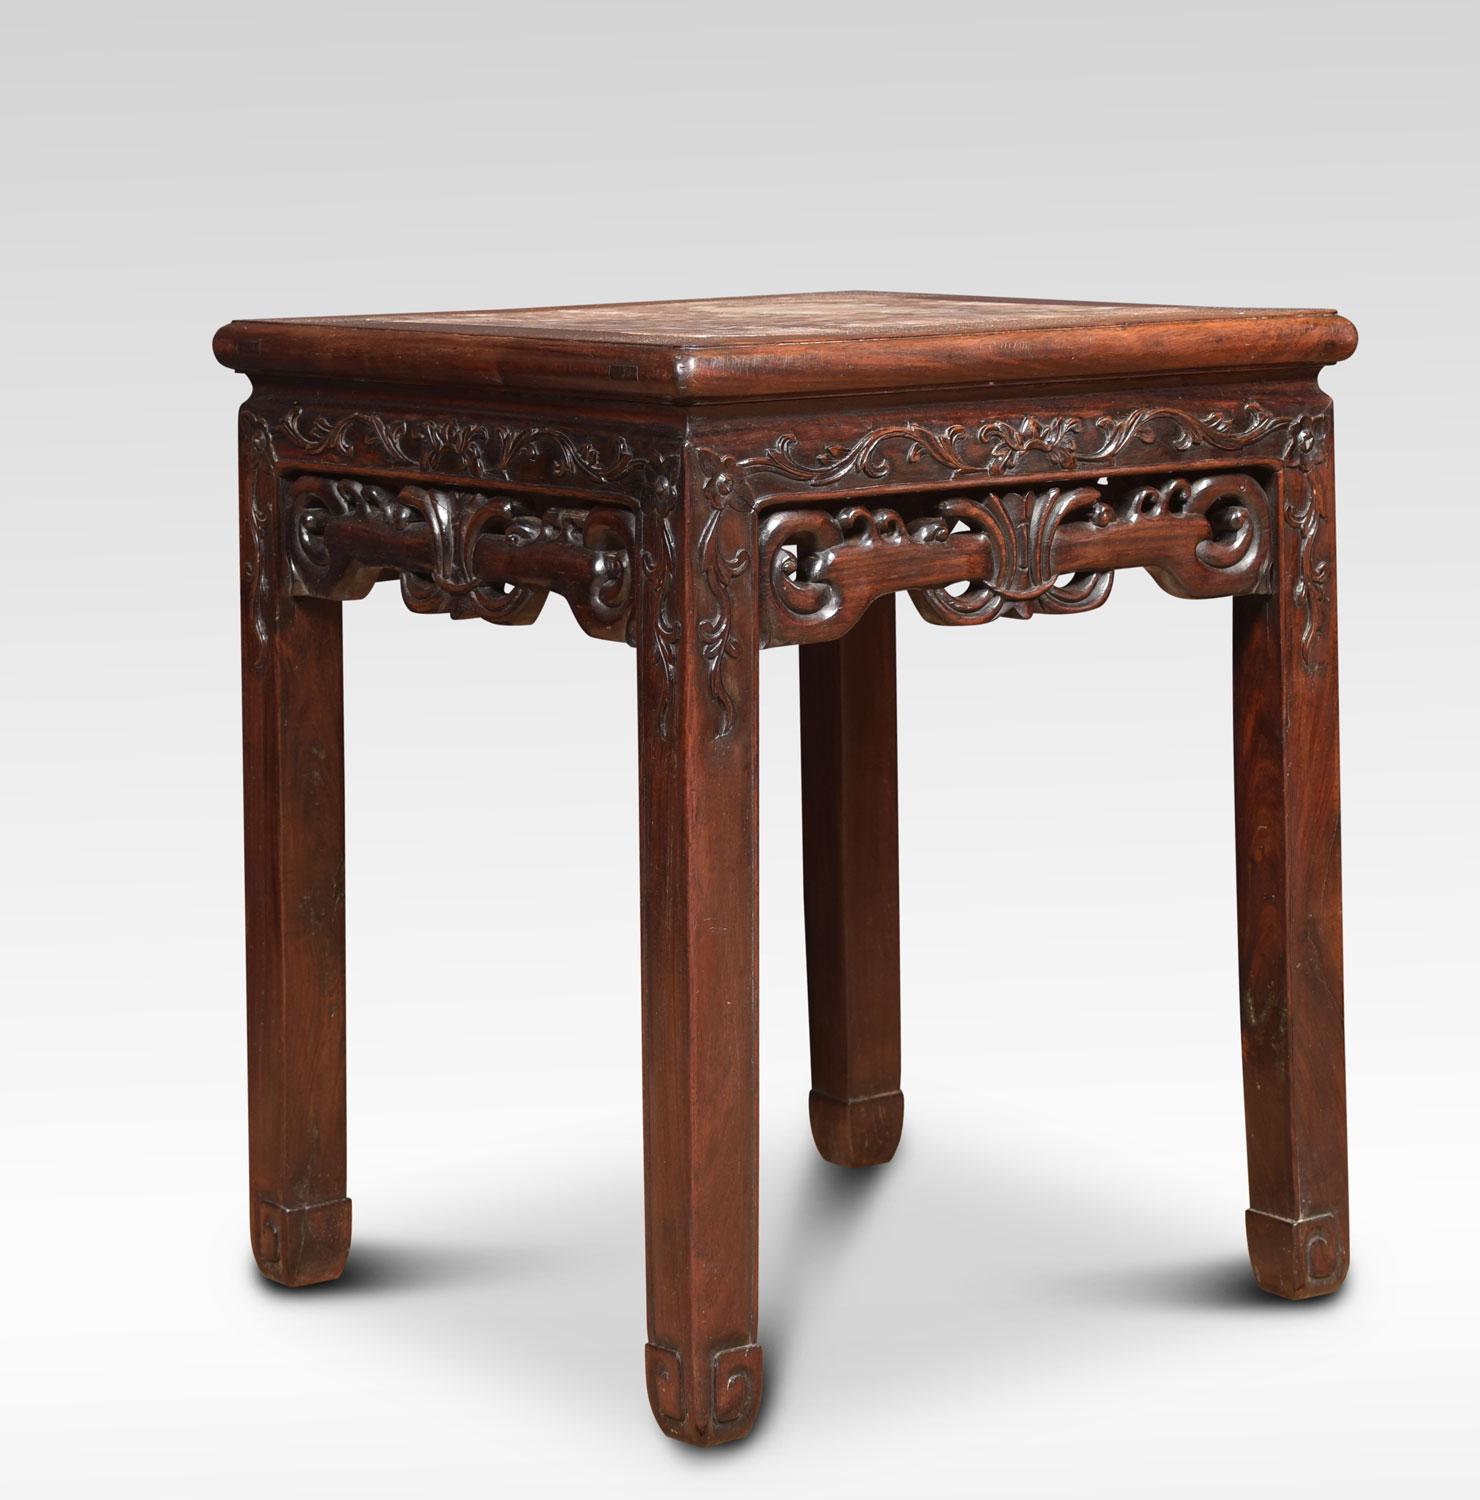 Chinese hardwood occasional table of square section, with inset red marble top, over a carved freeze, on shaped stylized supports
Dimensions:
Height 20.5 inches
Width 17 inches
Depth 17 inches.